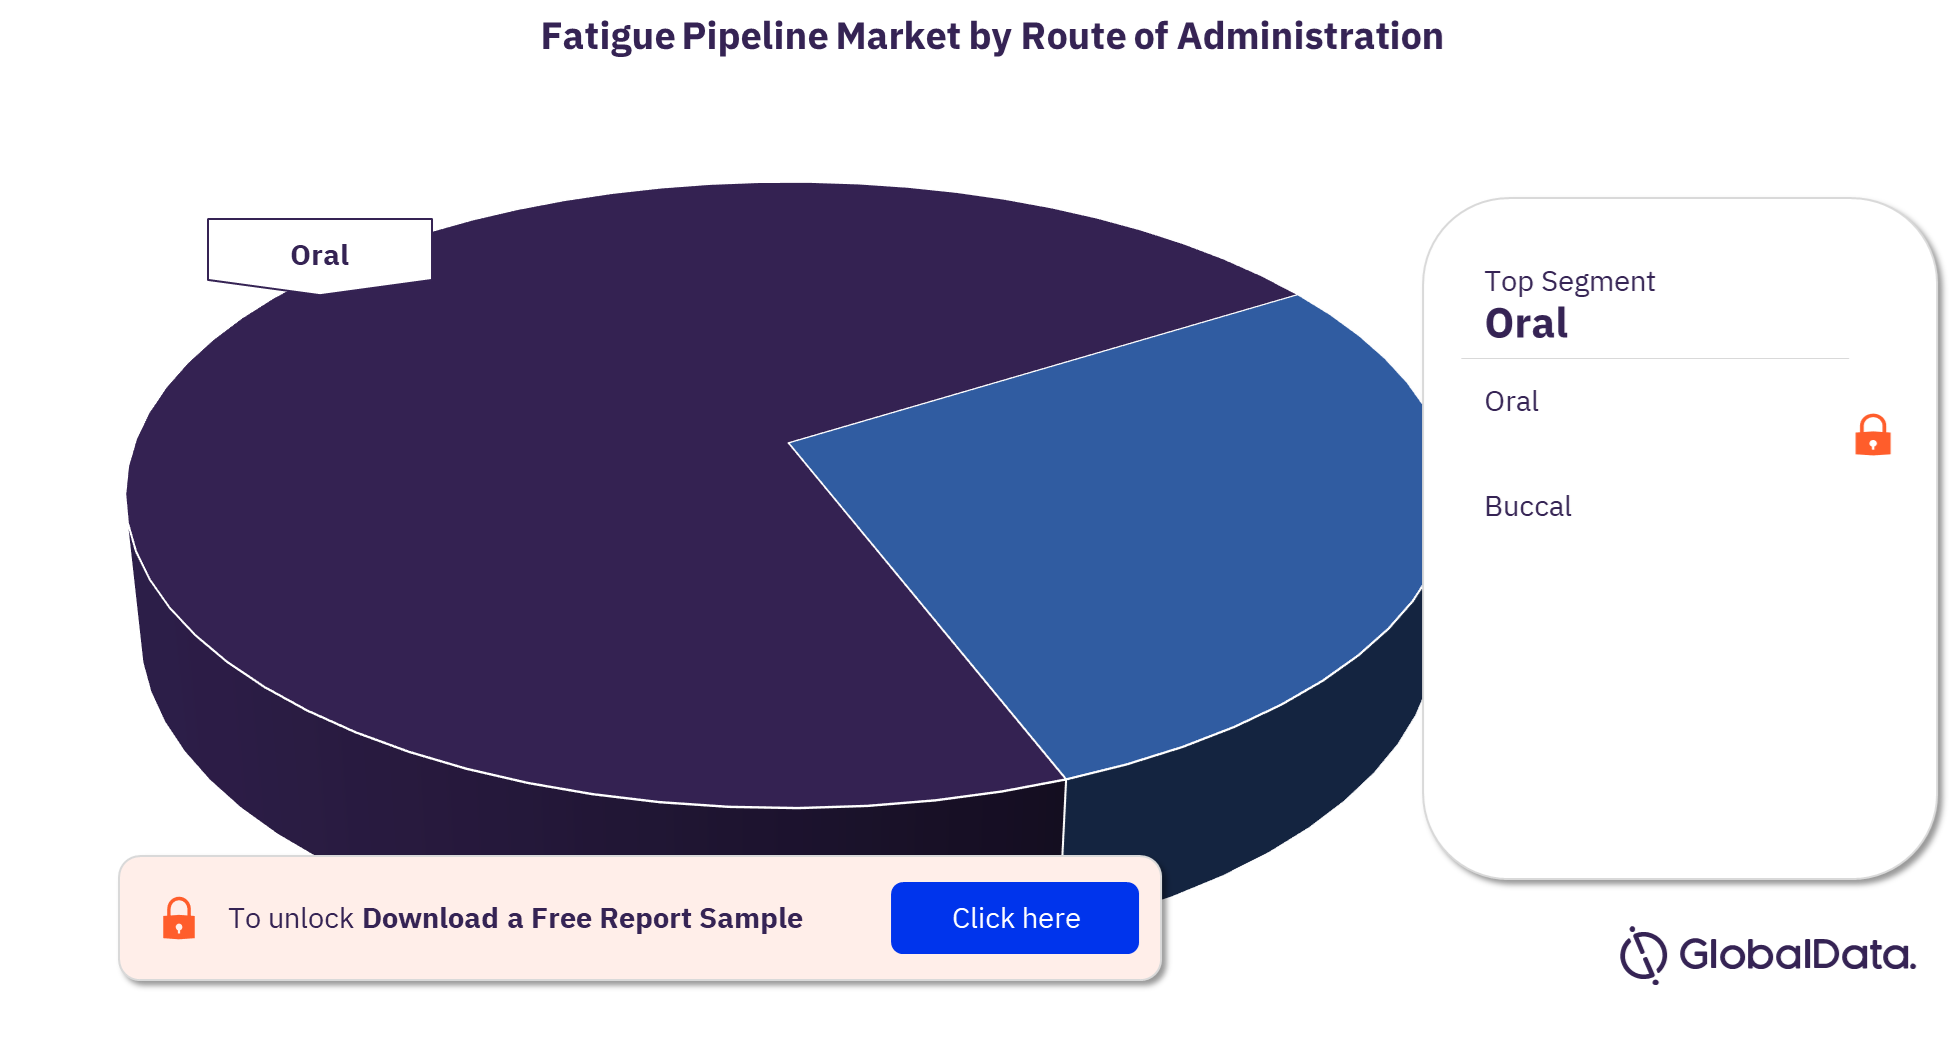 Fatigue pipeline market, by route of administration